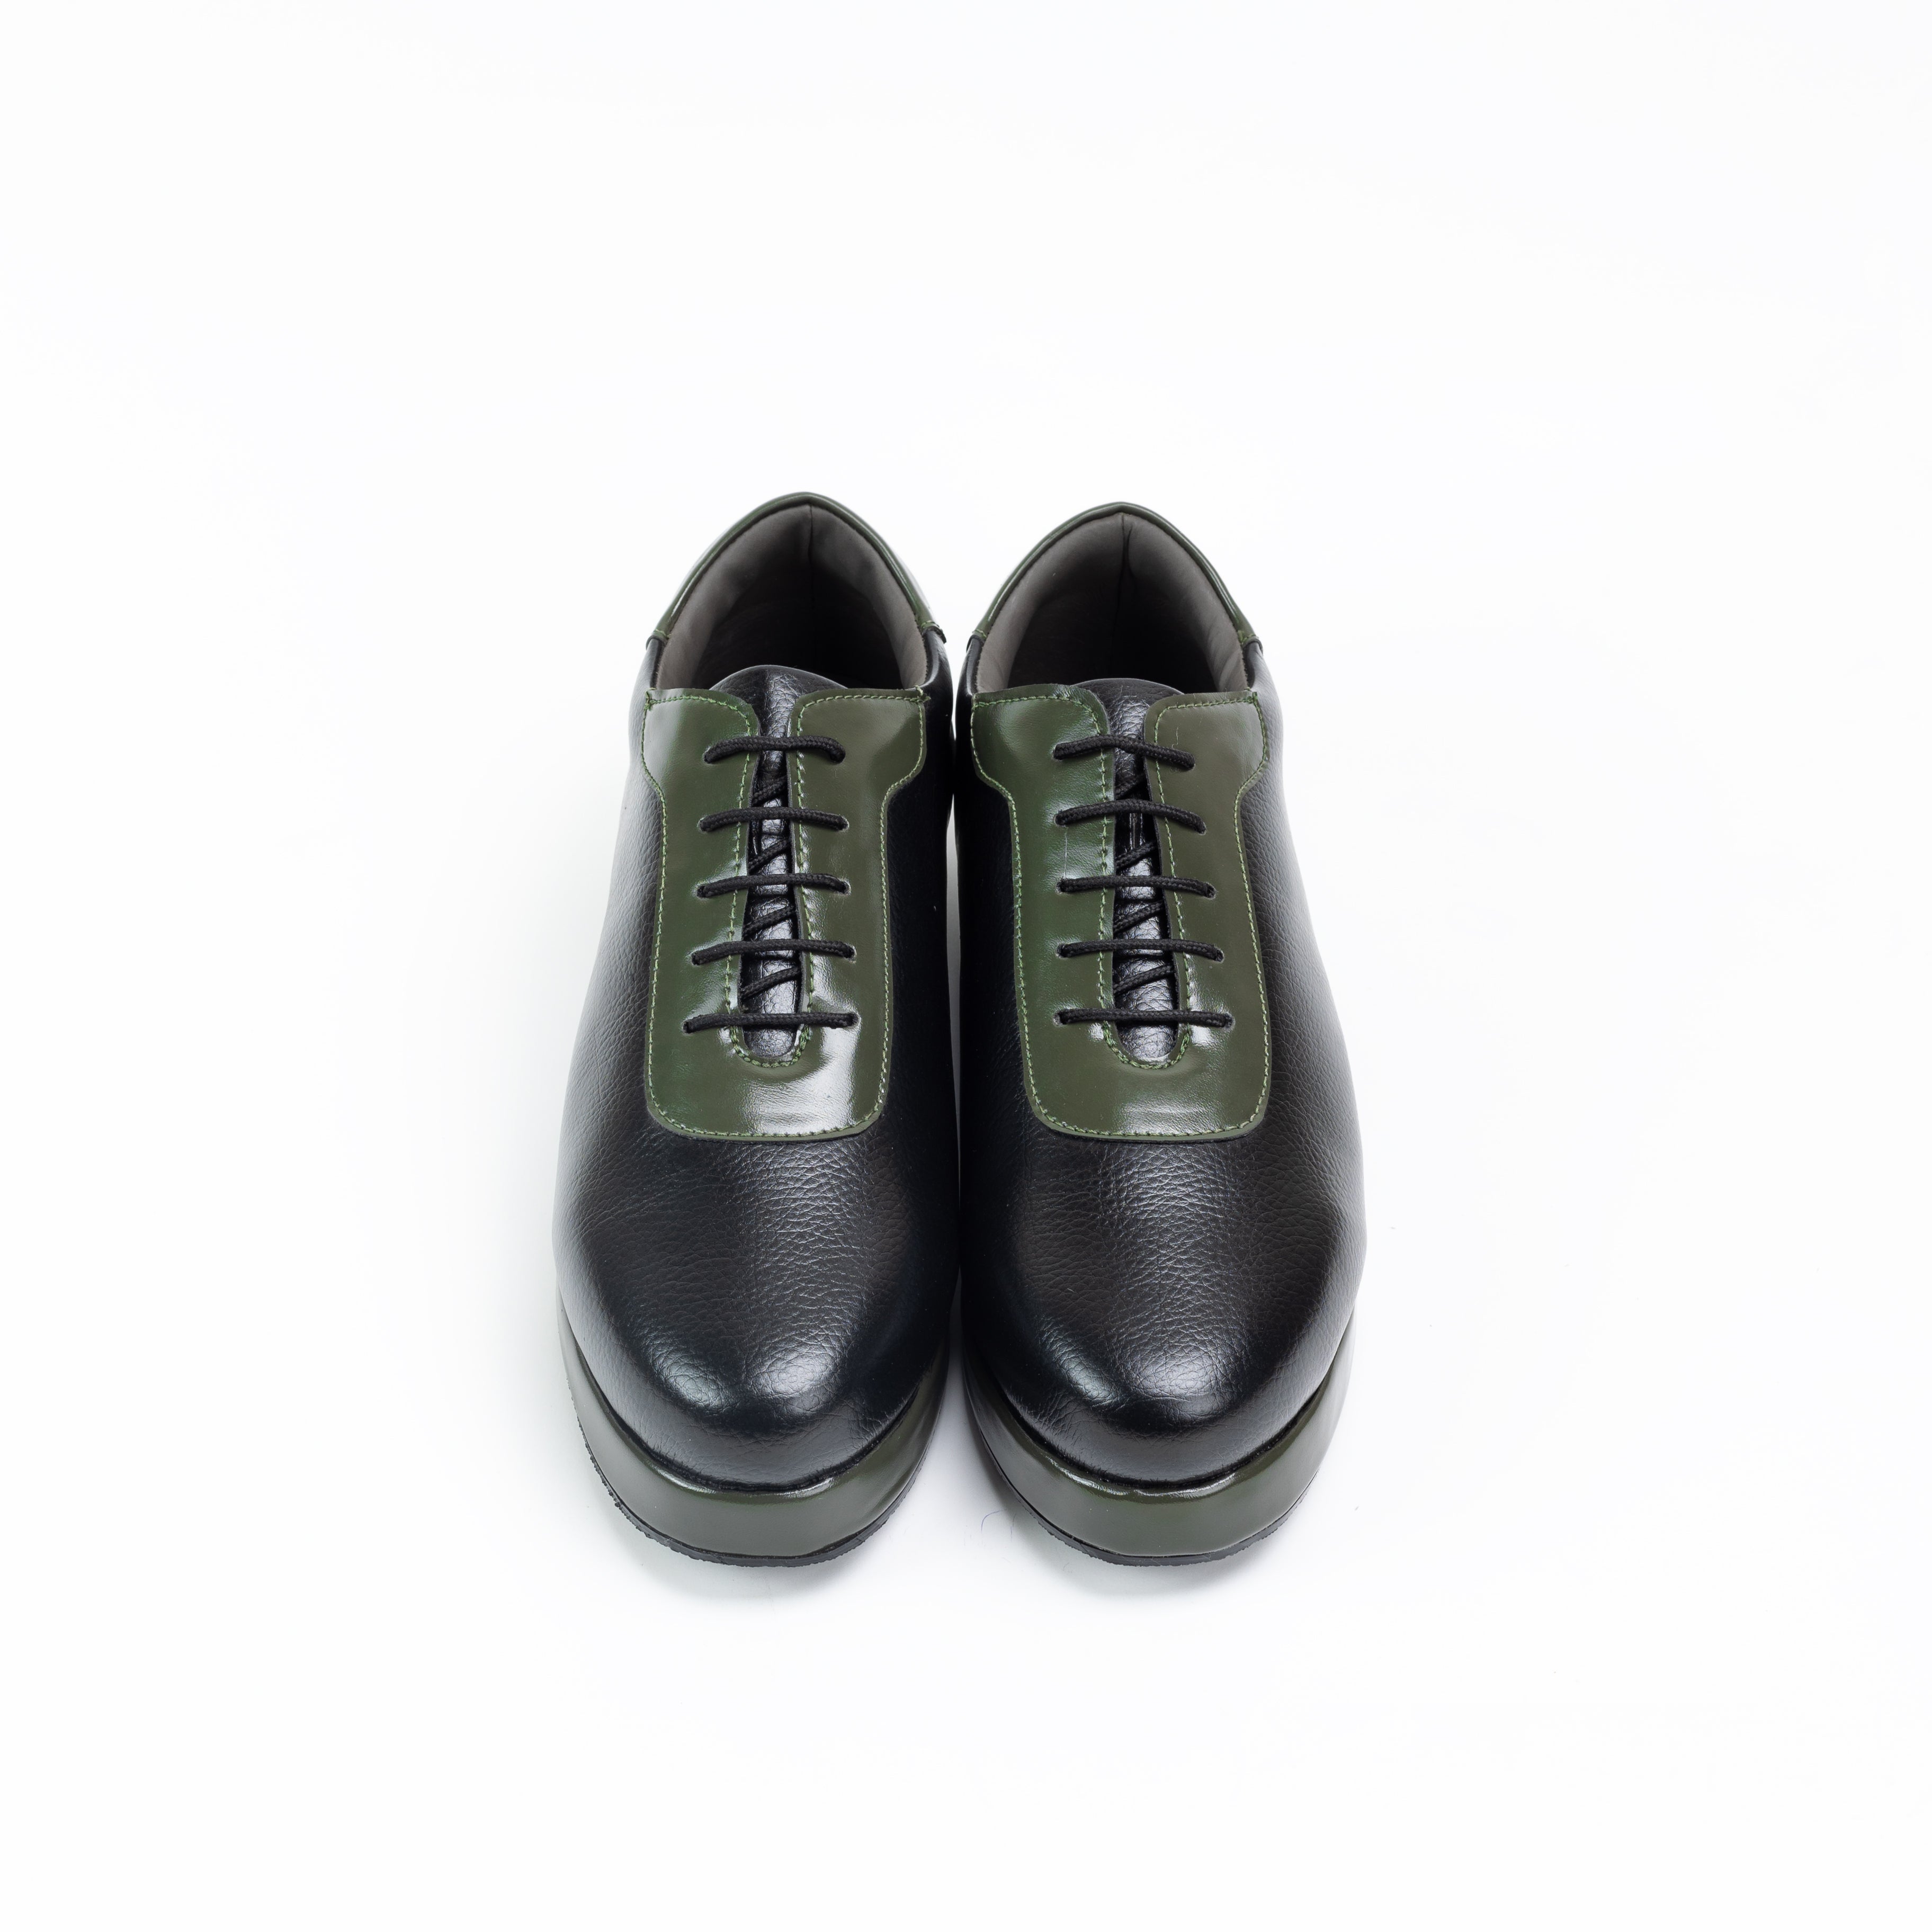 The Offbeat Lace Vegan Sneakers - The Deep Thinker by monkstory are men's black and green vegan leather sneakers on a white background.